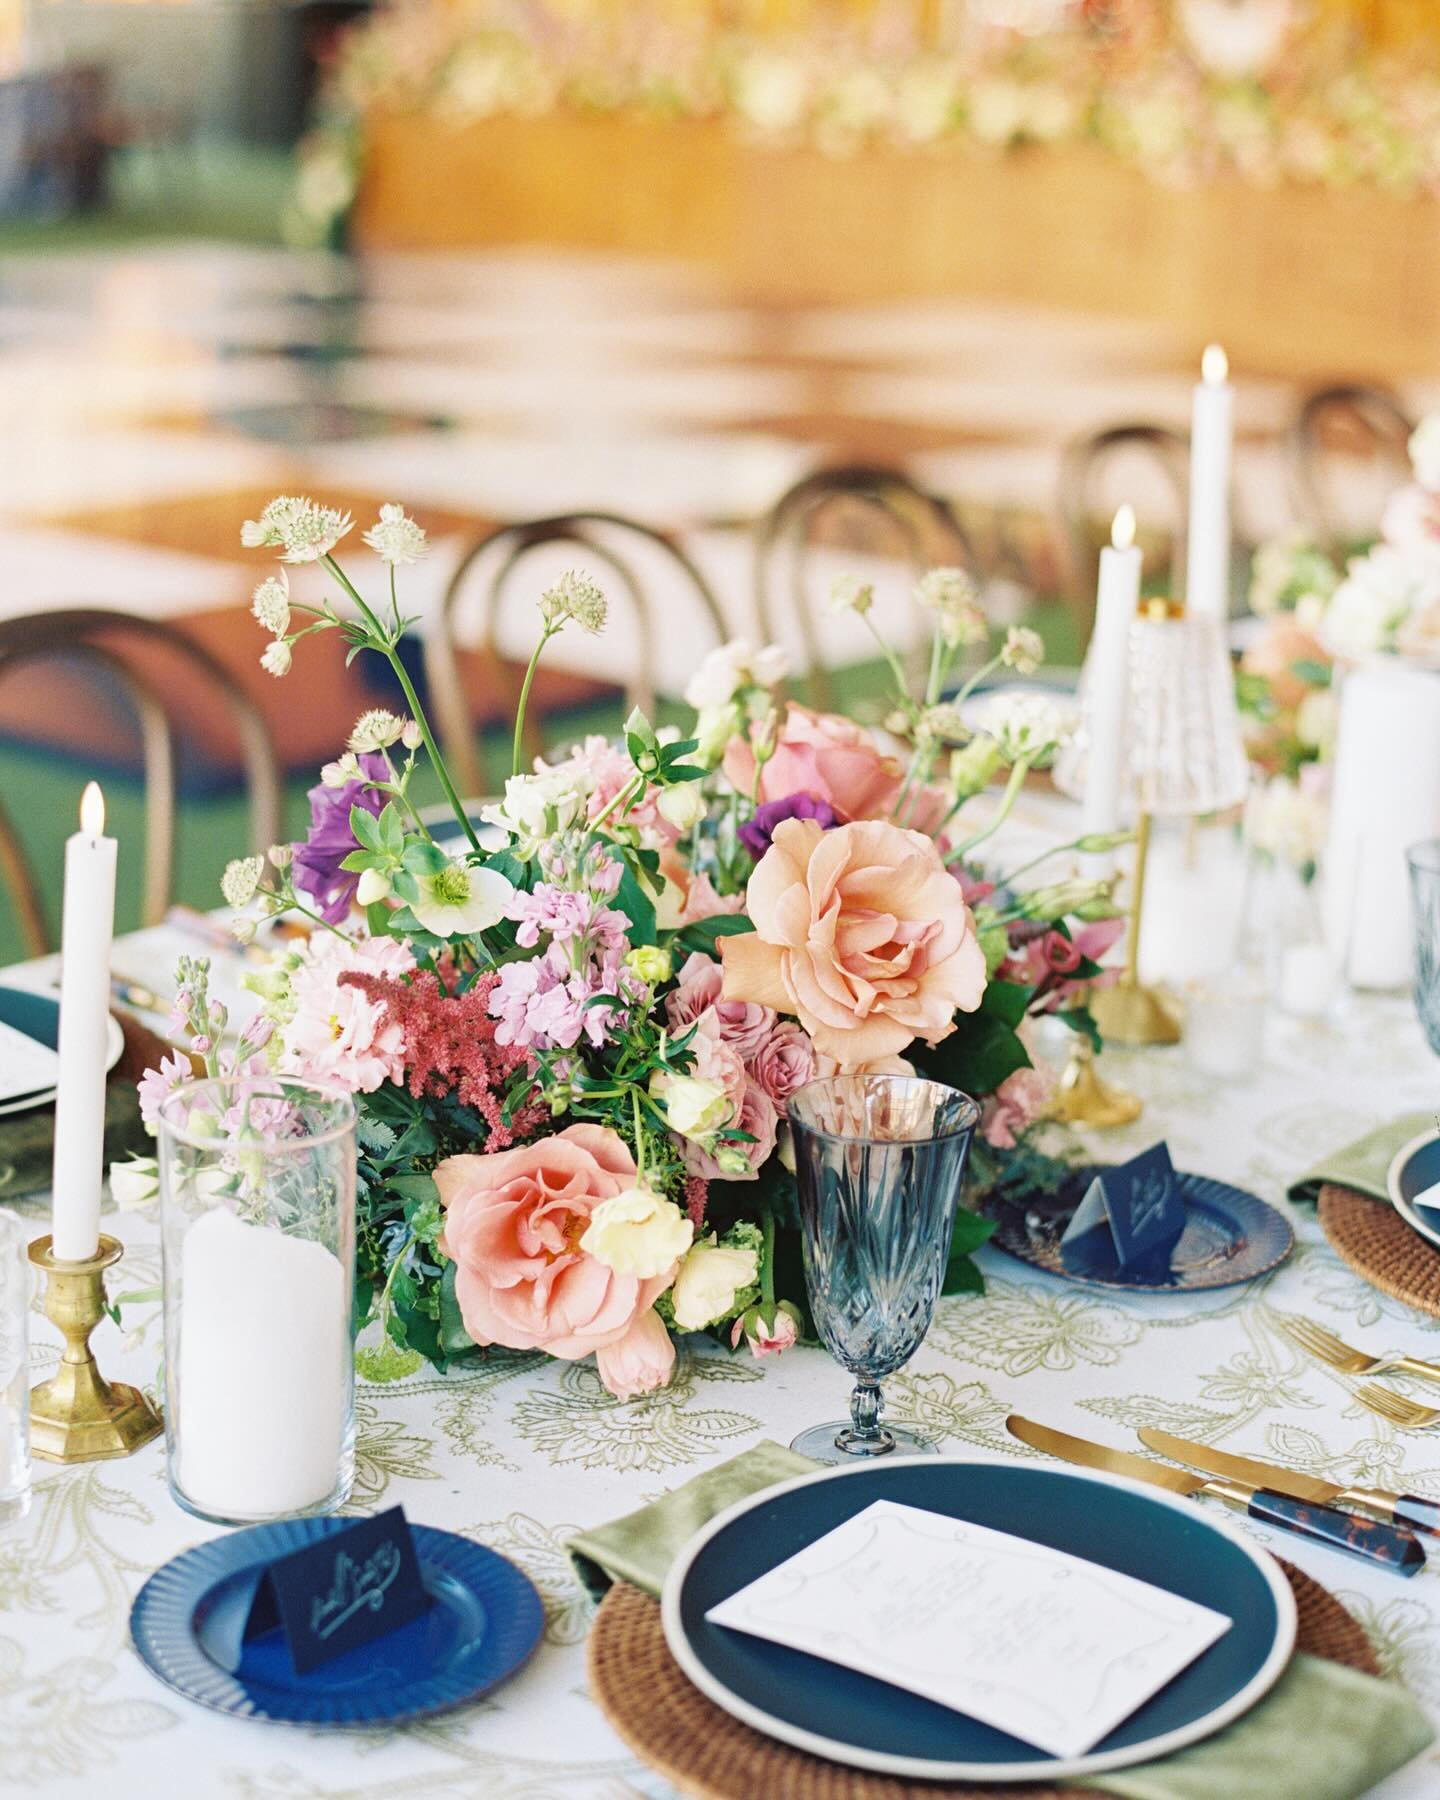 Details from a dreamy tablescape by @aliceandapricot &amp; @petals_couture ❤️ so much to love!